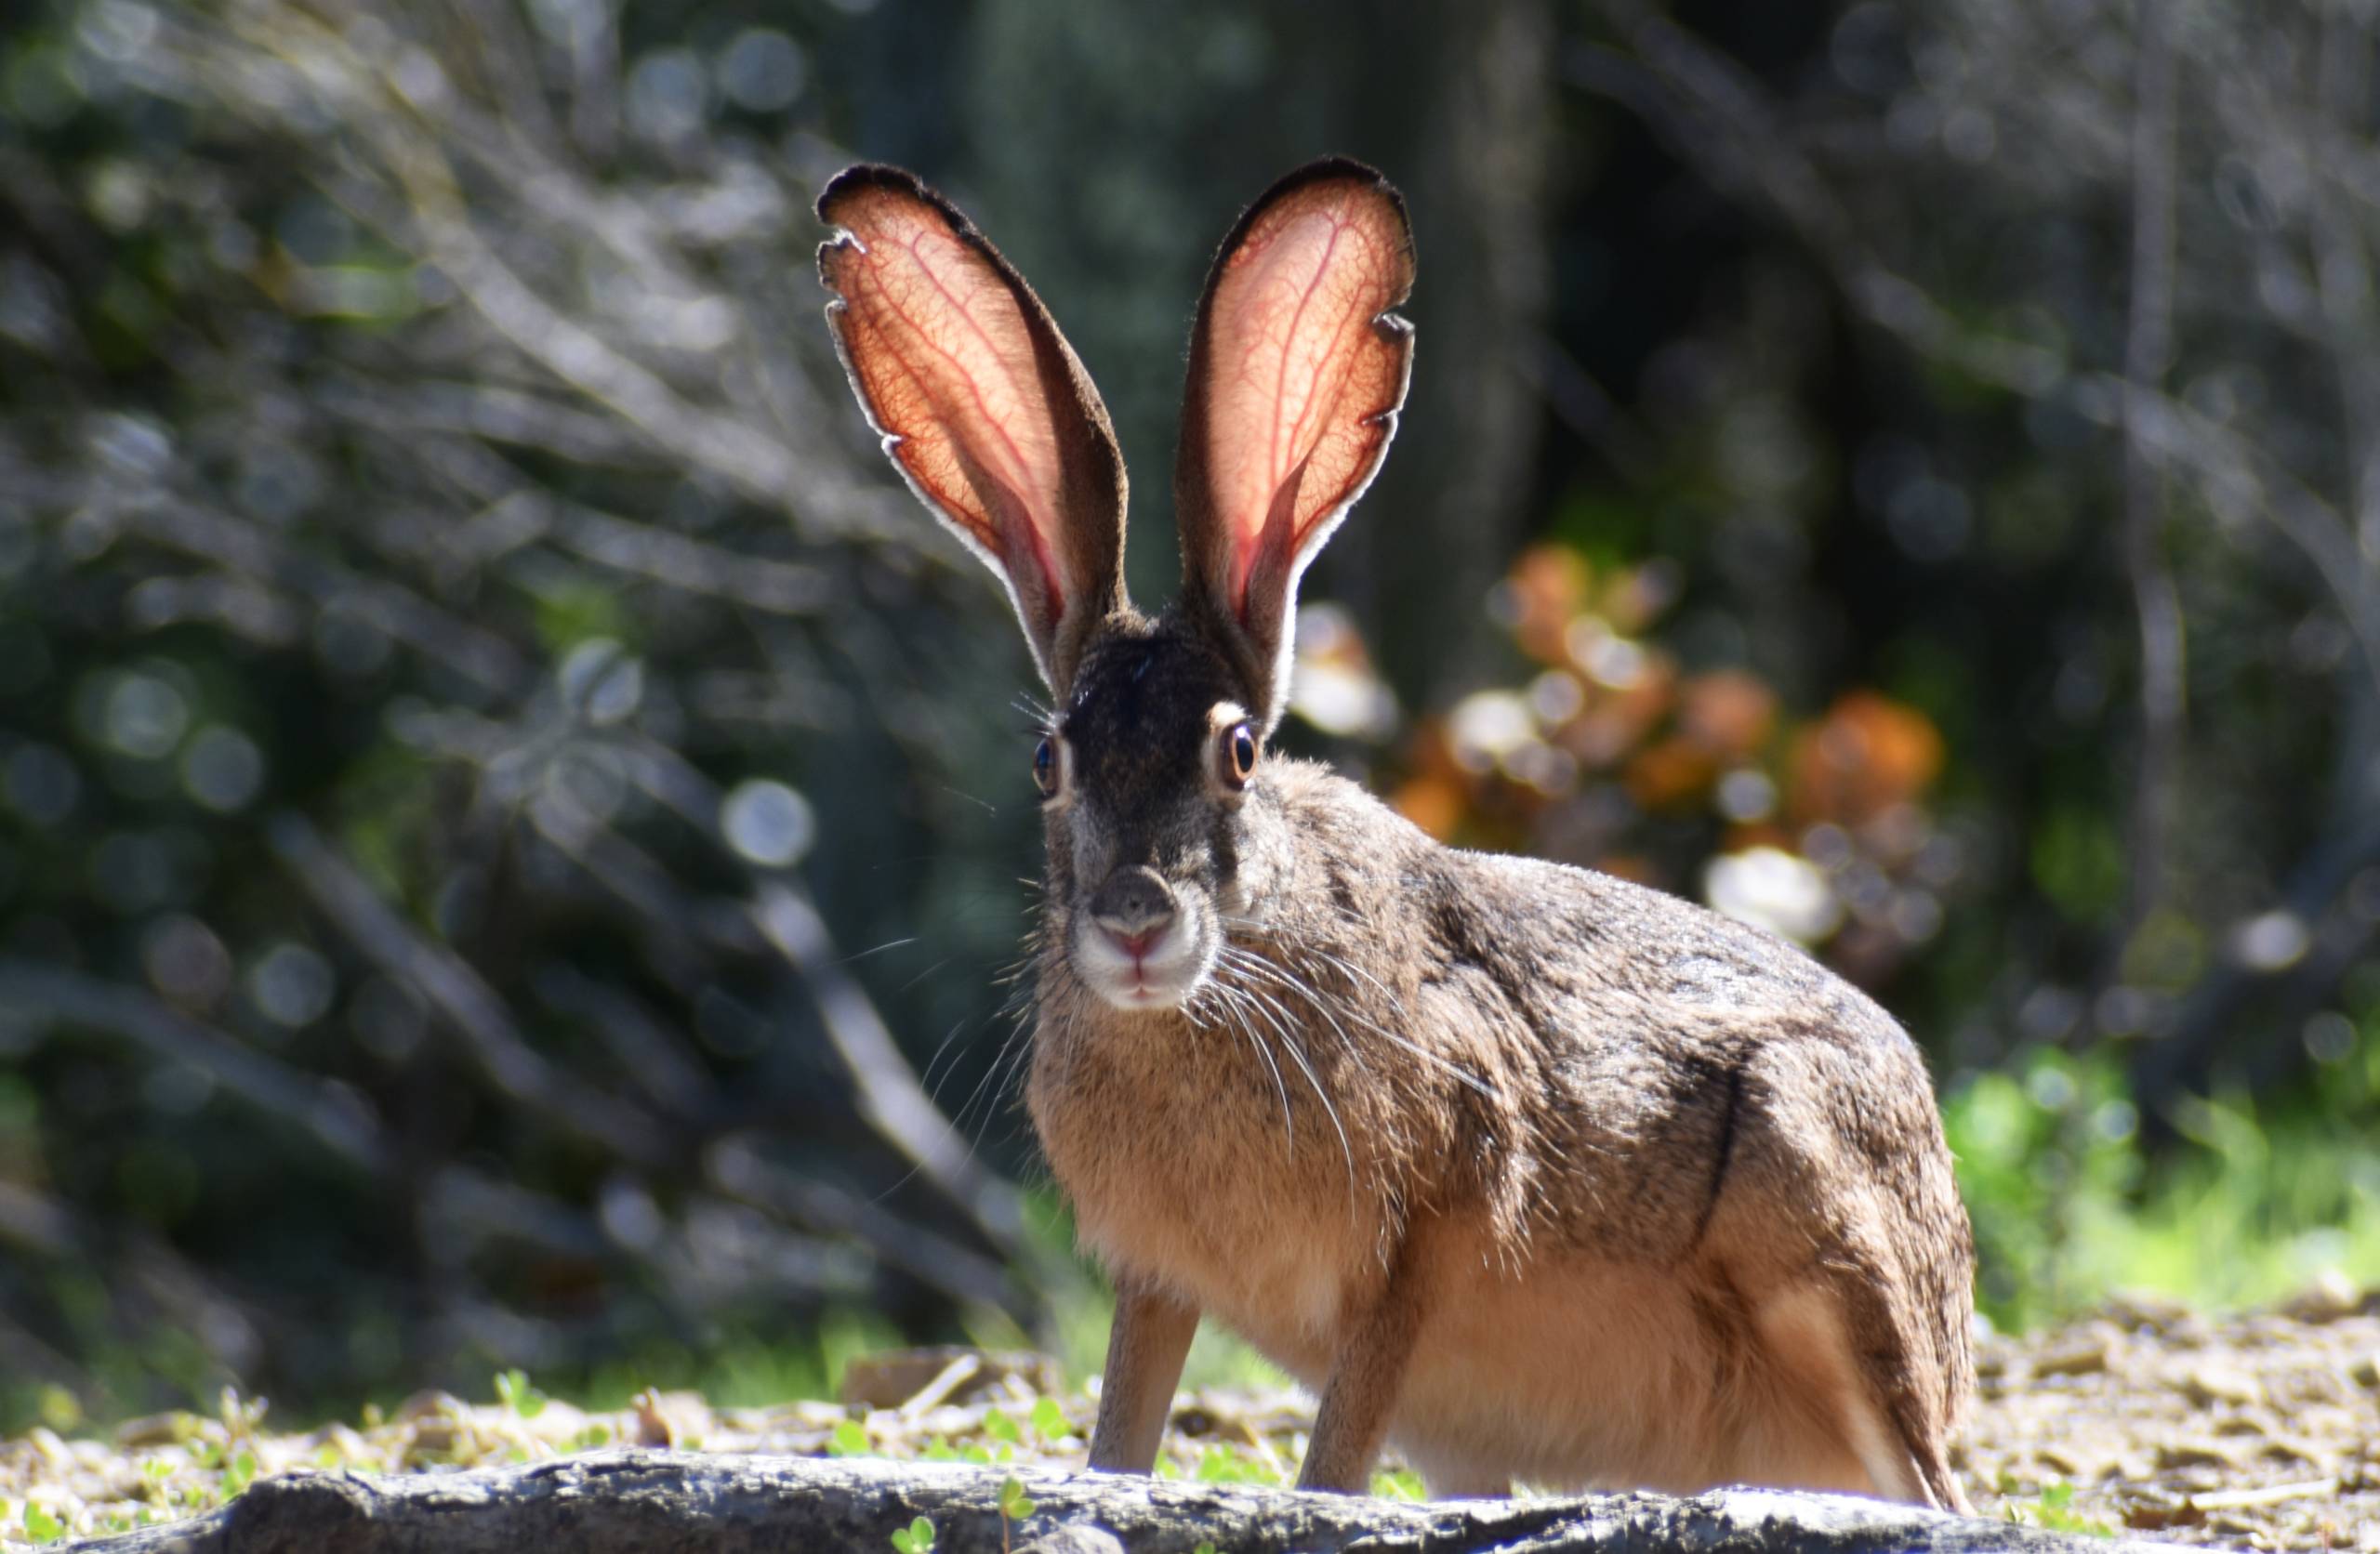 A large rabbit with thin legs and very large ears faces forward. It has very wide eyes.